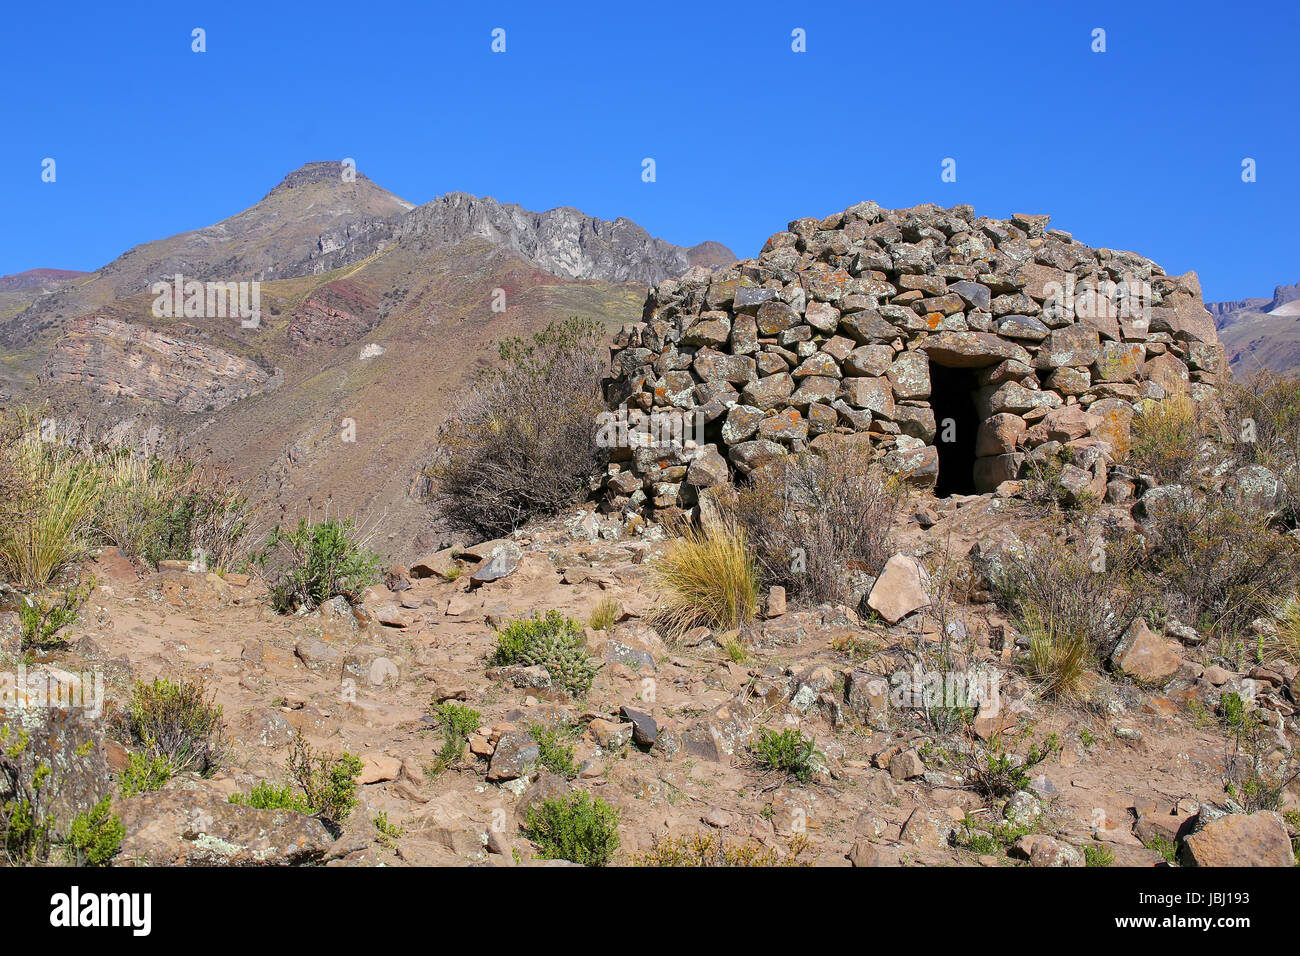 Pre-Incan round house named colca near Chivay in Peru. Colcas are circular stone structures used for food storage or burials. Stock Photo